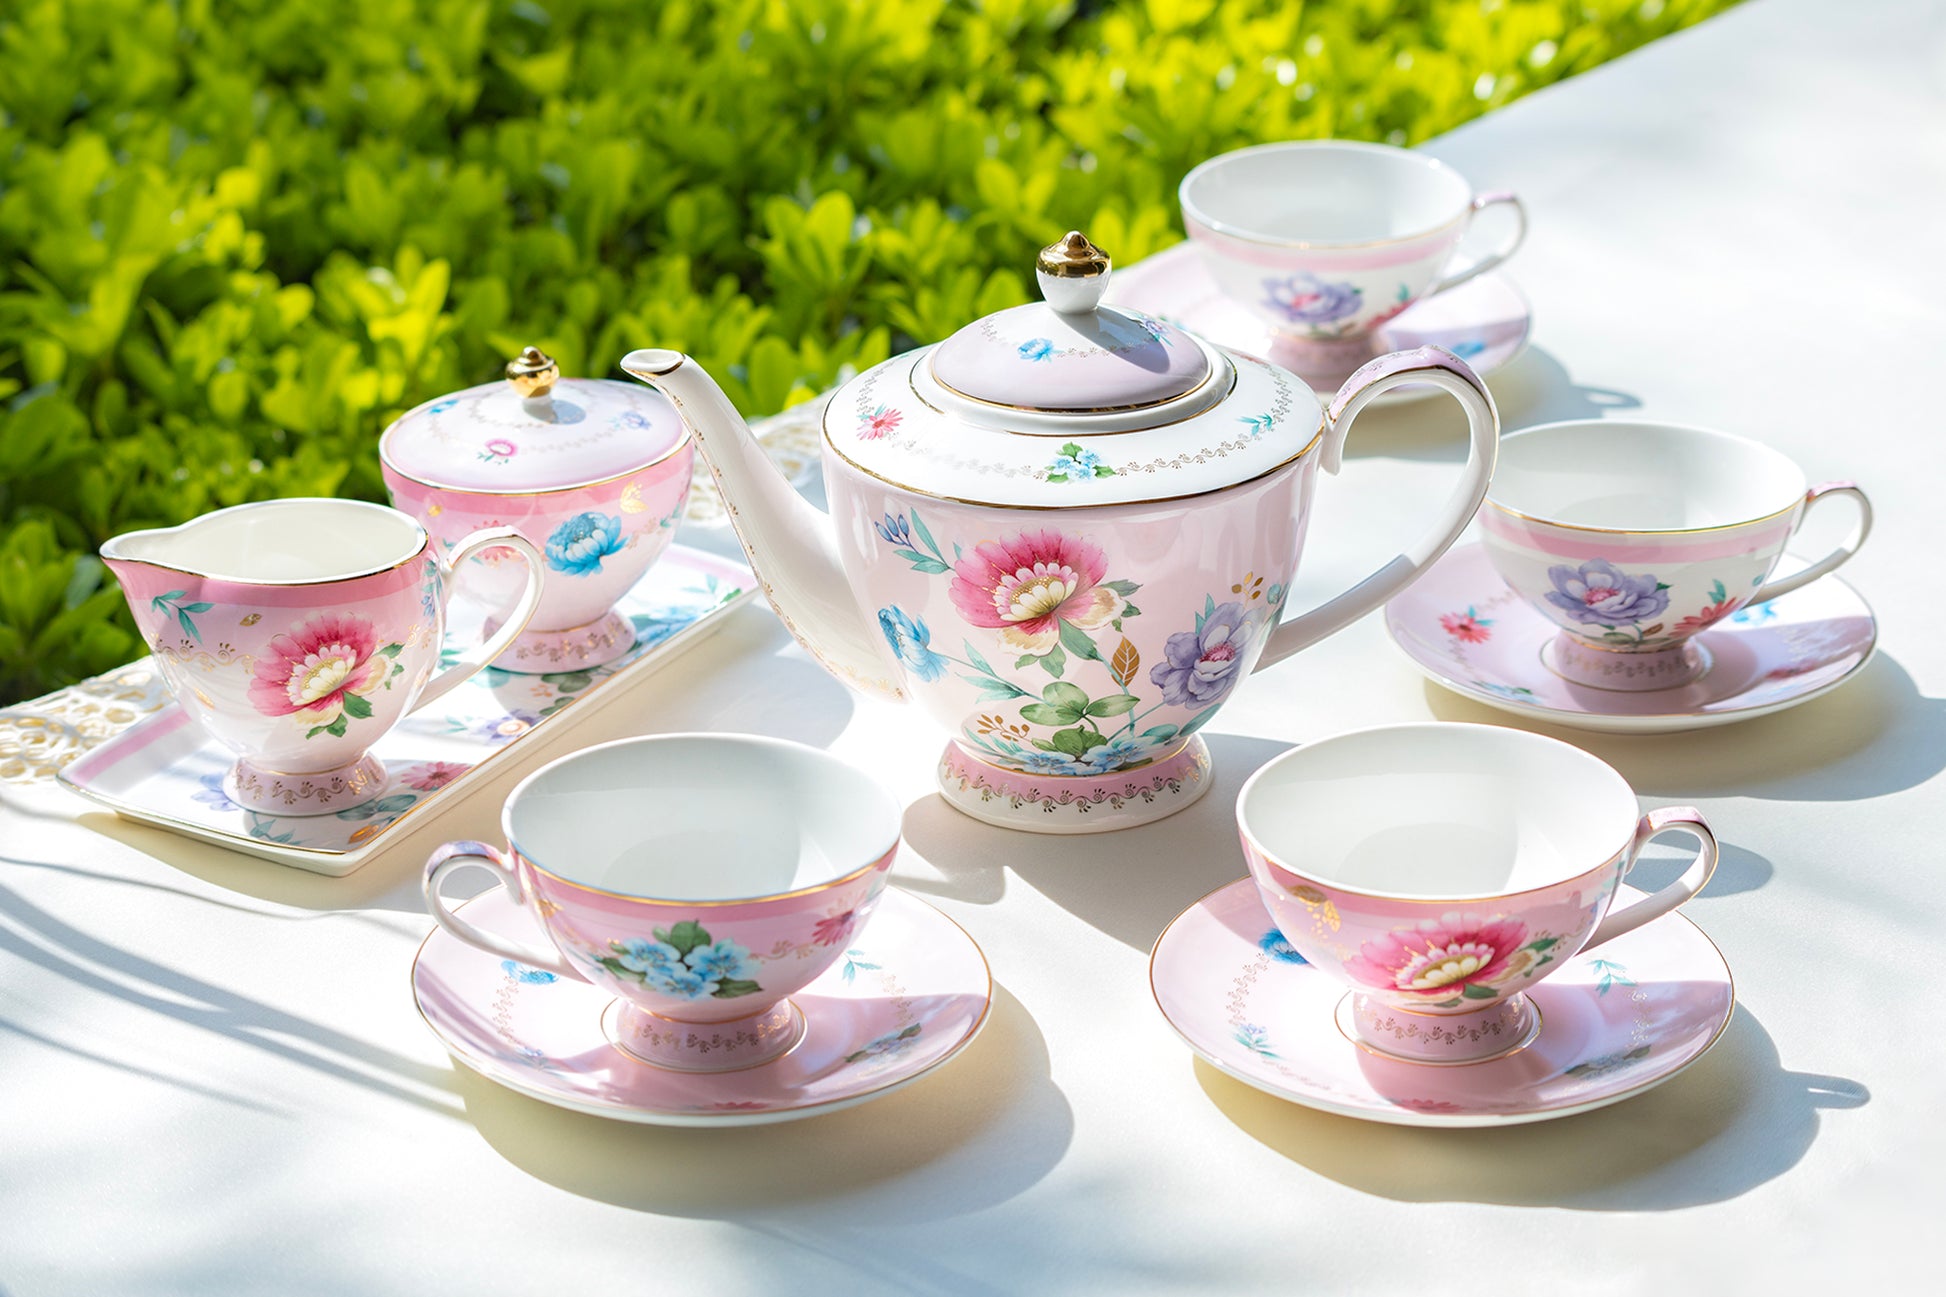 Porcelain Tea Set Tea Set, Tea Cups and Saucers Set with and 6 Tea Cups  China Tea Cups Tea Gift Sets for Adults Tea Party Great Gift Afternoon